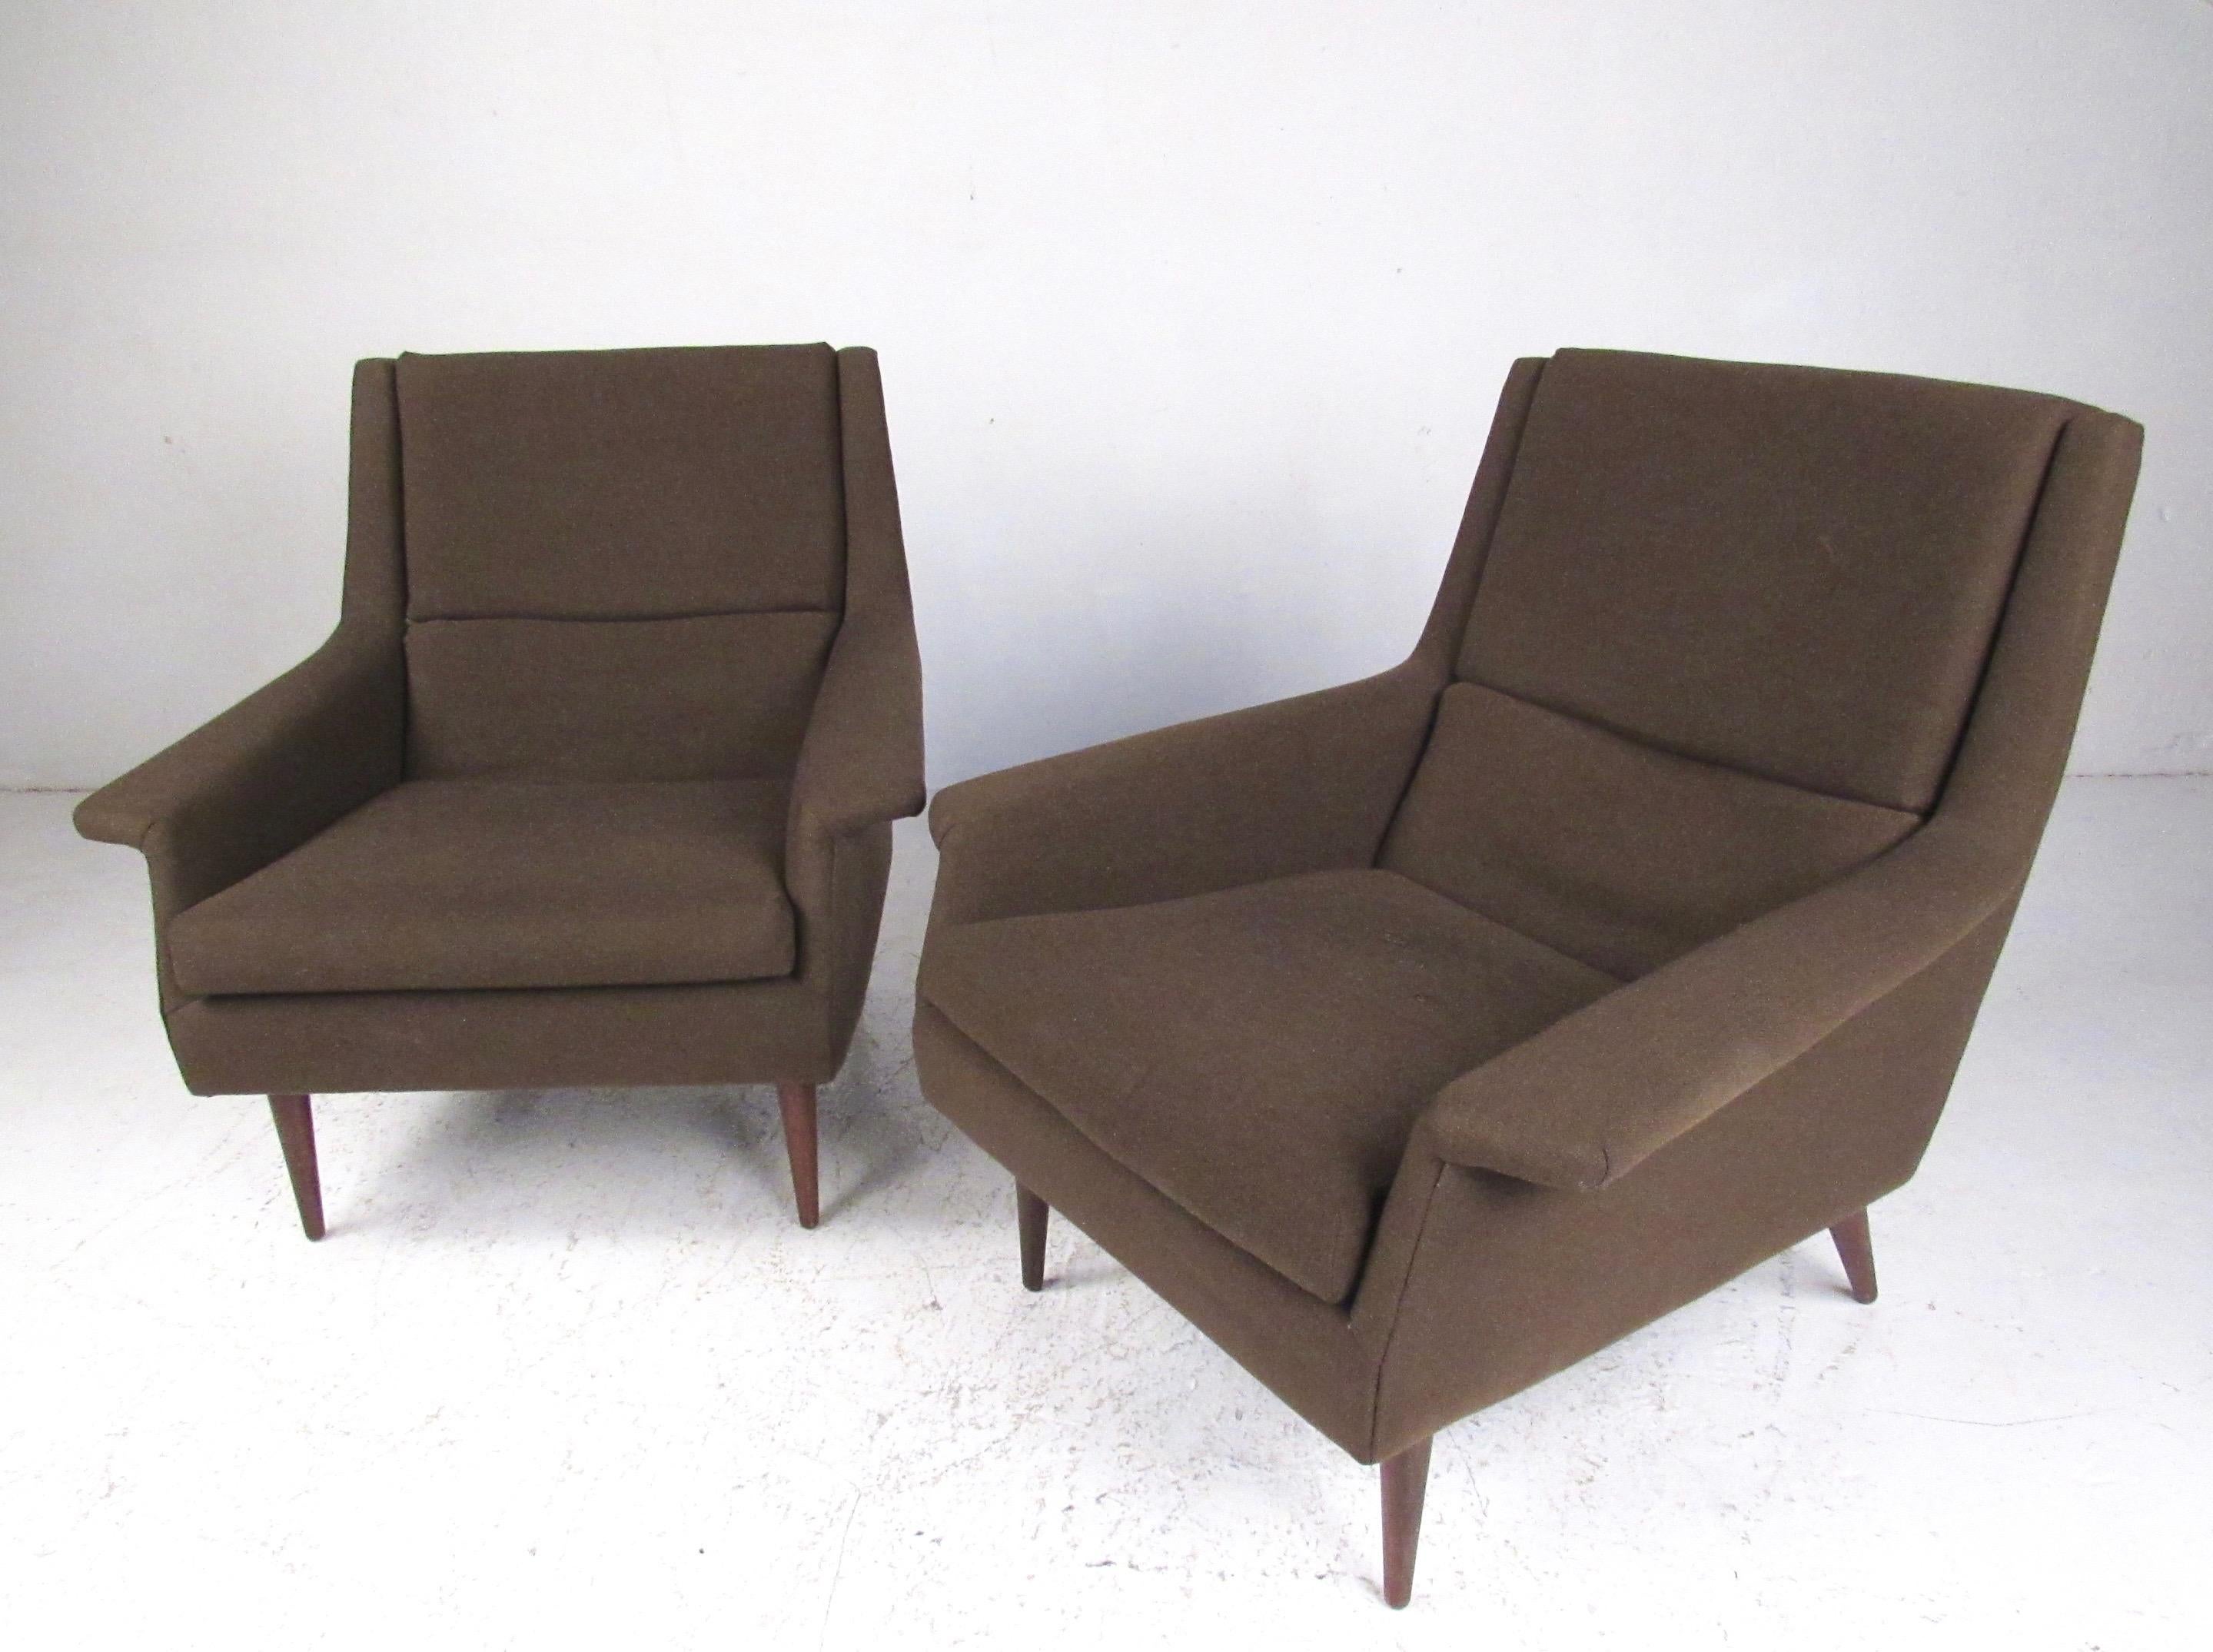 This stylish pair of matching Mid-Century Modern lounge chairs feature timeless Milo Baughman design for Thayer Coggin. The tapered vintage walnut legs and shapely seat frames are perfectly complimented by the uniquely angled armrests. Iconic design